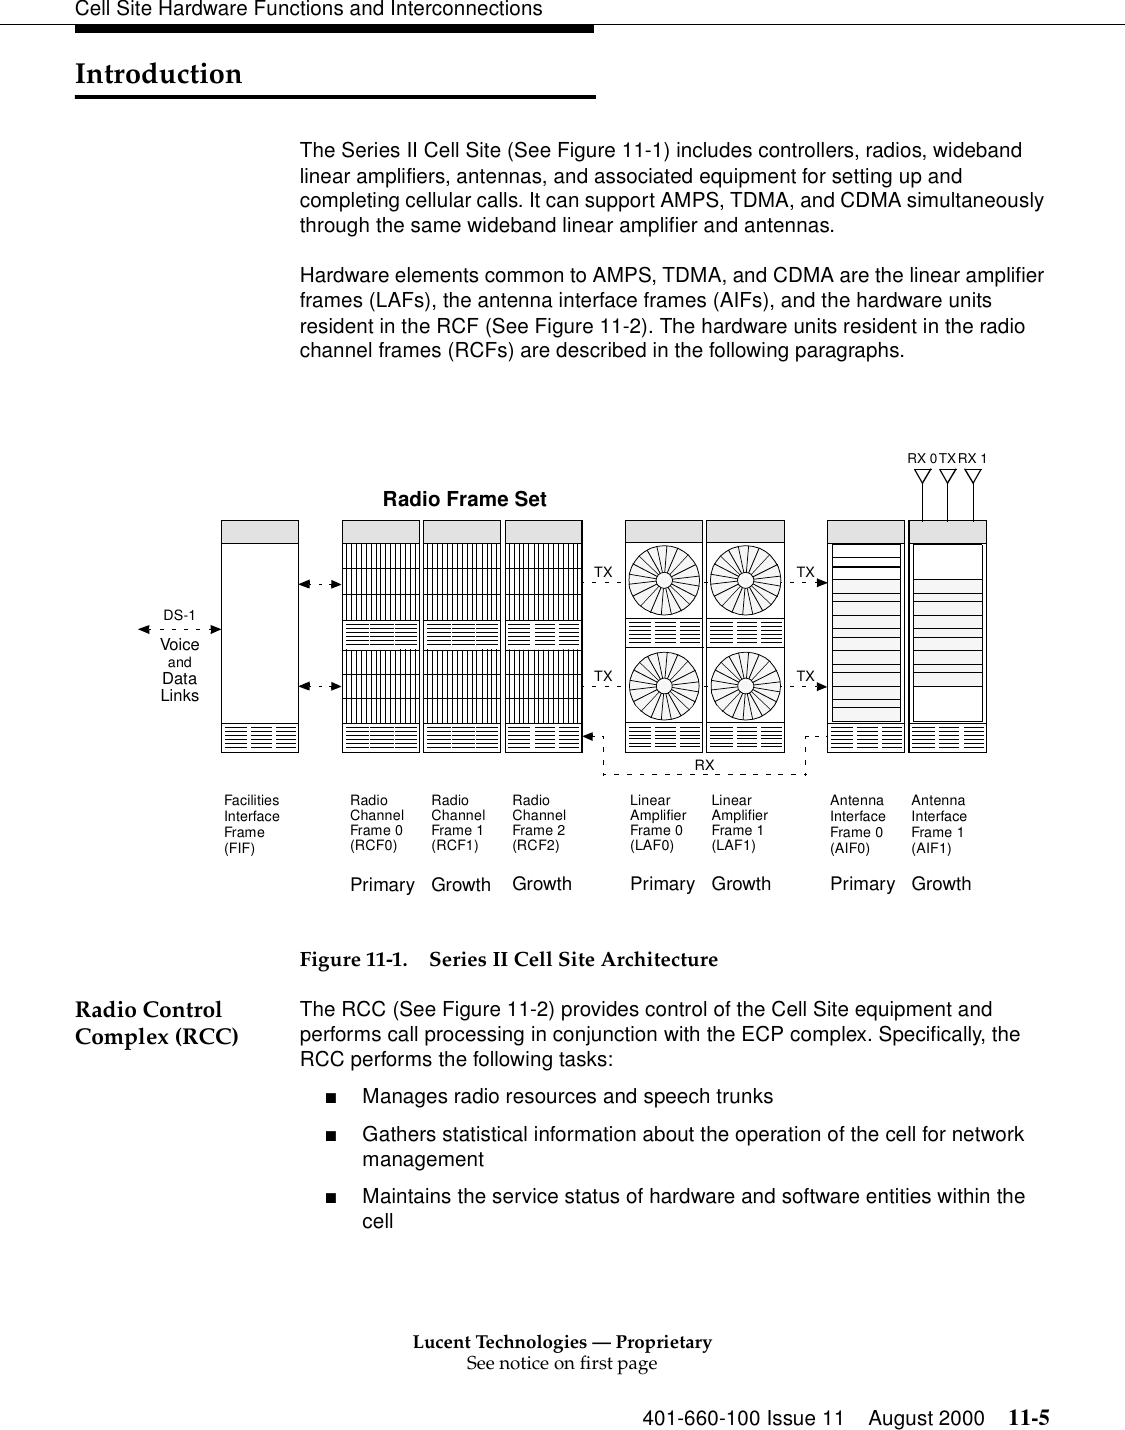 Lucent Technologies — ProprietarySee notice on first page401-660-100 Issue 11 August 2000 11-5Cell Site Hardware Functions and InterconnectionsIntroductionThe Series II Cell Site (See Figure 11-1) includes controllers, radios, wideband linear amplifiers, antennas, and associated equipment for setting up and completing cellular calls. It can support AMPS, TDMA, and CDMA simultaneously through the same wideband linear amplifier and antennas.Hardware elements common to AMPS, TDMA, and CDMA are the linear amplifier frames (LAFs), the antenna interface frames (AIFs), and the hardware units resident in the RCF (See Figure 11-2). The hardware units resident in the radio channel frames (RCFs) are described in the following paragraphs.Figure 11-1. Series II Cell Site ArchitectureRadio Control Complex (RCC) The RCC (See Figure 11-2) provides control of the Cell Site equipment and performs call processing in conjunction with the ECP complex. Specifically, the RCC performs the following tasks:■Manages radio resources and speech trunks■Gathers statistical information about the operation of the cell for network management■Maintains the service status of hardware and software entities within the cellTX TXTX TXRXPrimaryRadioChannelFrame 0(RCF0)RadioChannelFrame 1(RCF1)Growth GrowthRadioChannelFrame 2(RCF2)AntennaInterfaceFrame 0(AIF0)AntennaInterfaceFrame 1(AIF1)FacilitiesInterfaceFrame(FIF)LinearAmplifierFrame 0(LAF0)LinearAmplifierFrame 1(LAF1)Primary Growth Primary GrowthRX 0 RX 1TXRadio Frame SetDS-1VoiceandDataLinks